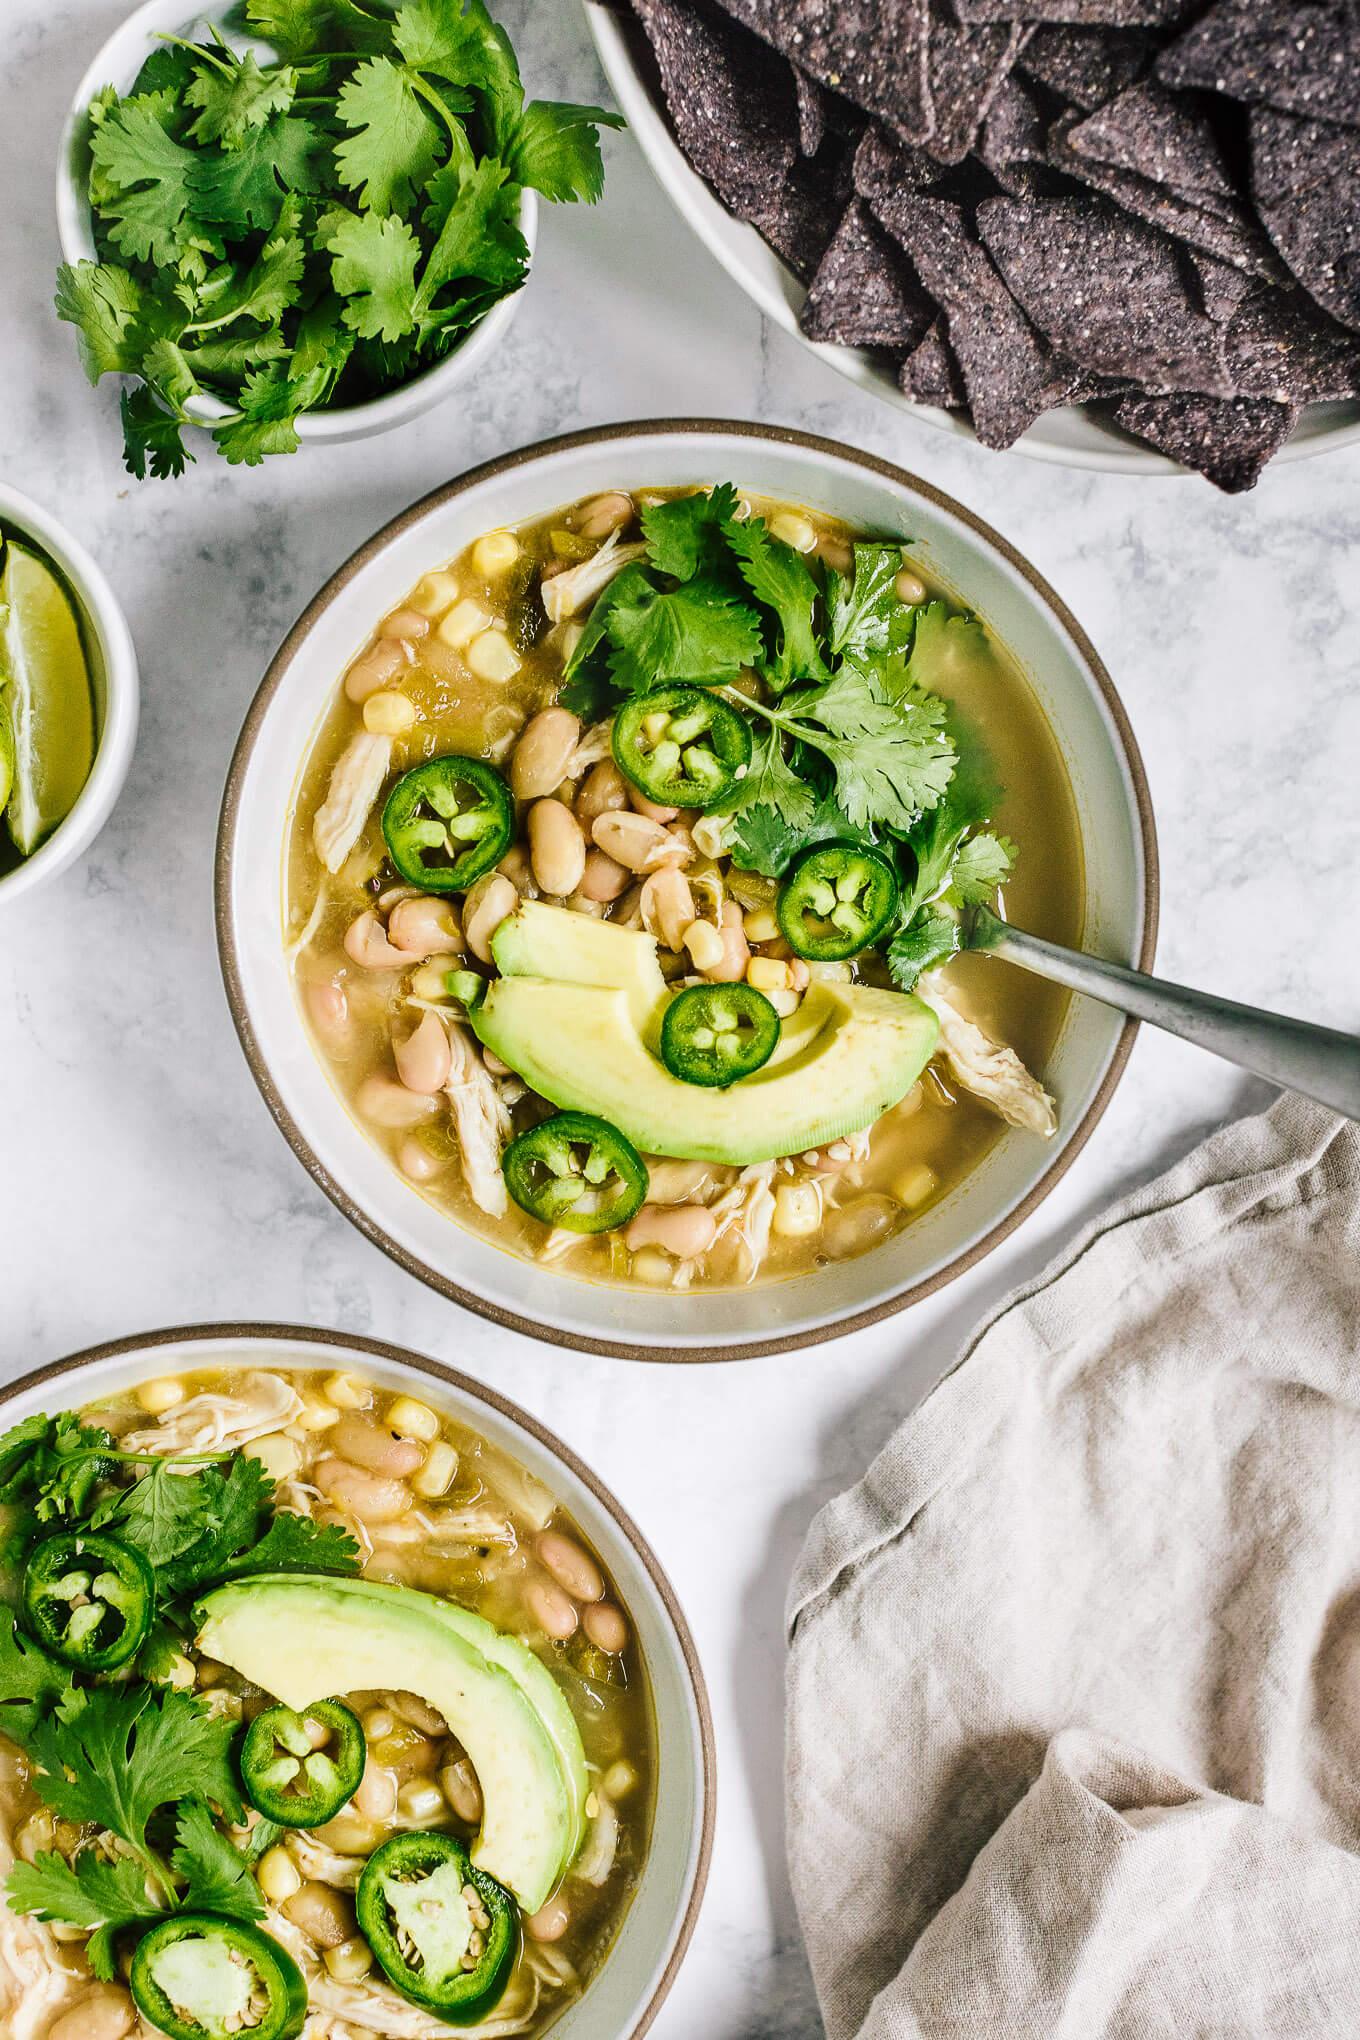 Bowls healthy white chicken chili with avocado slices, jalapenos and cilantro